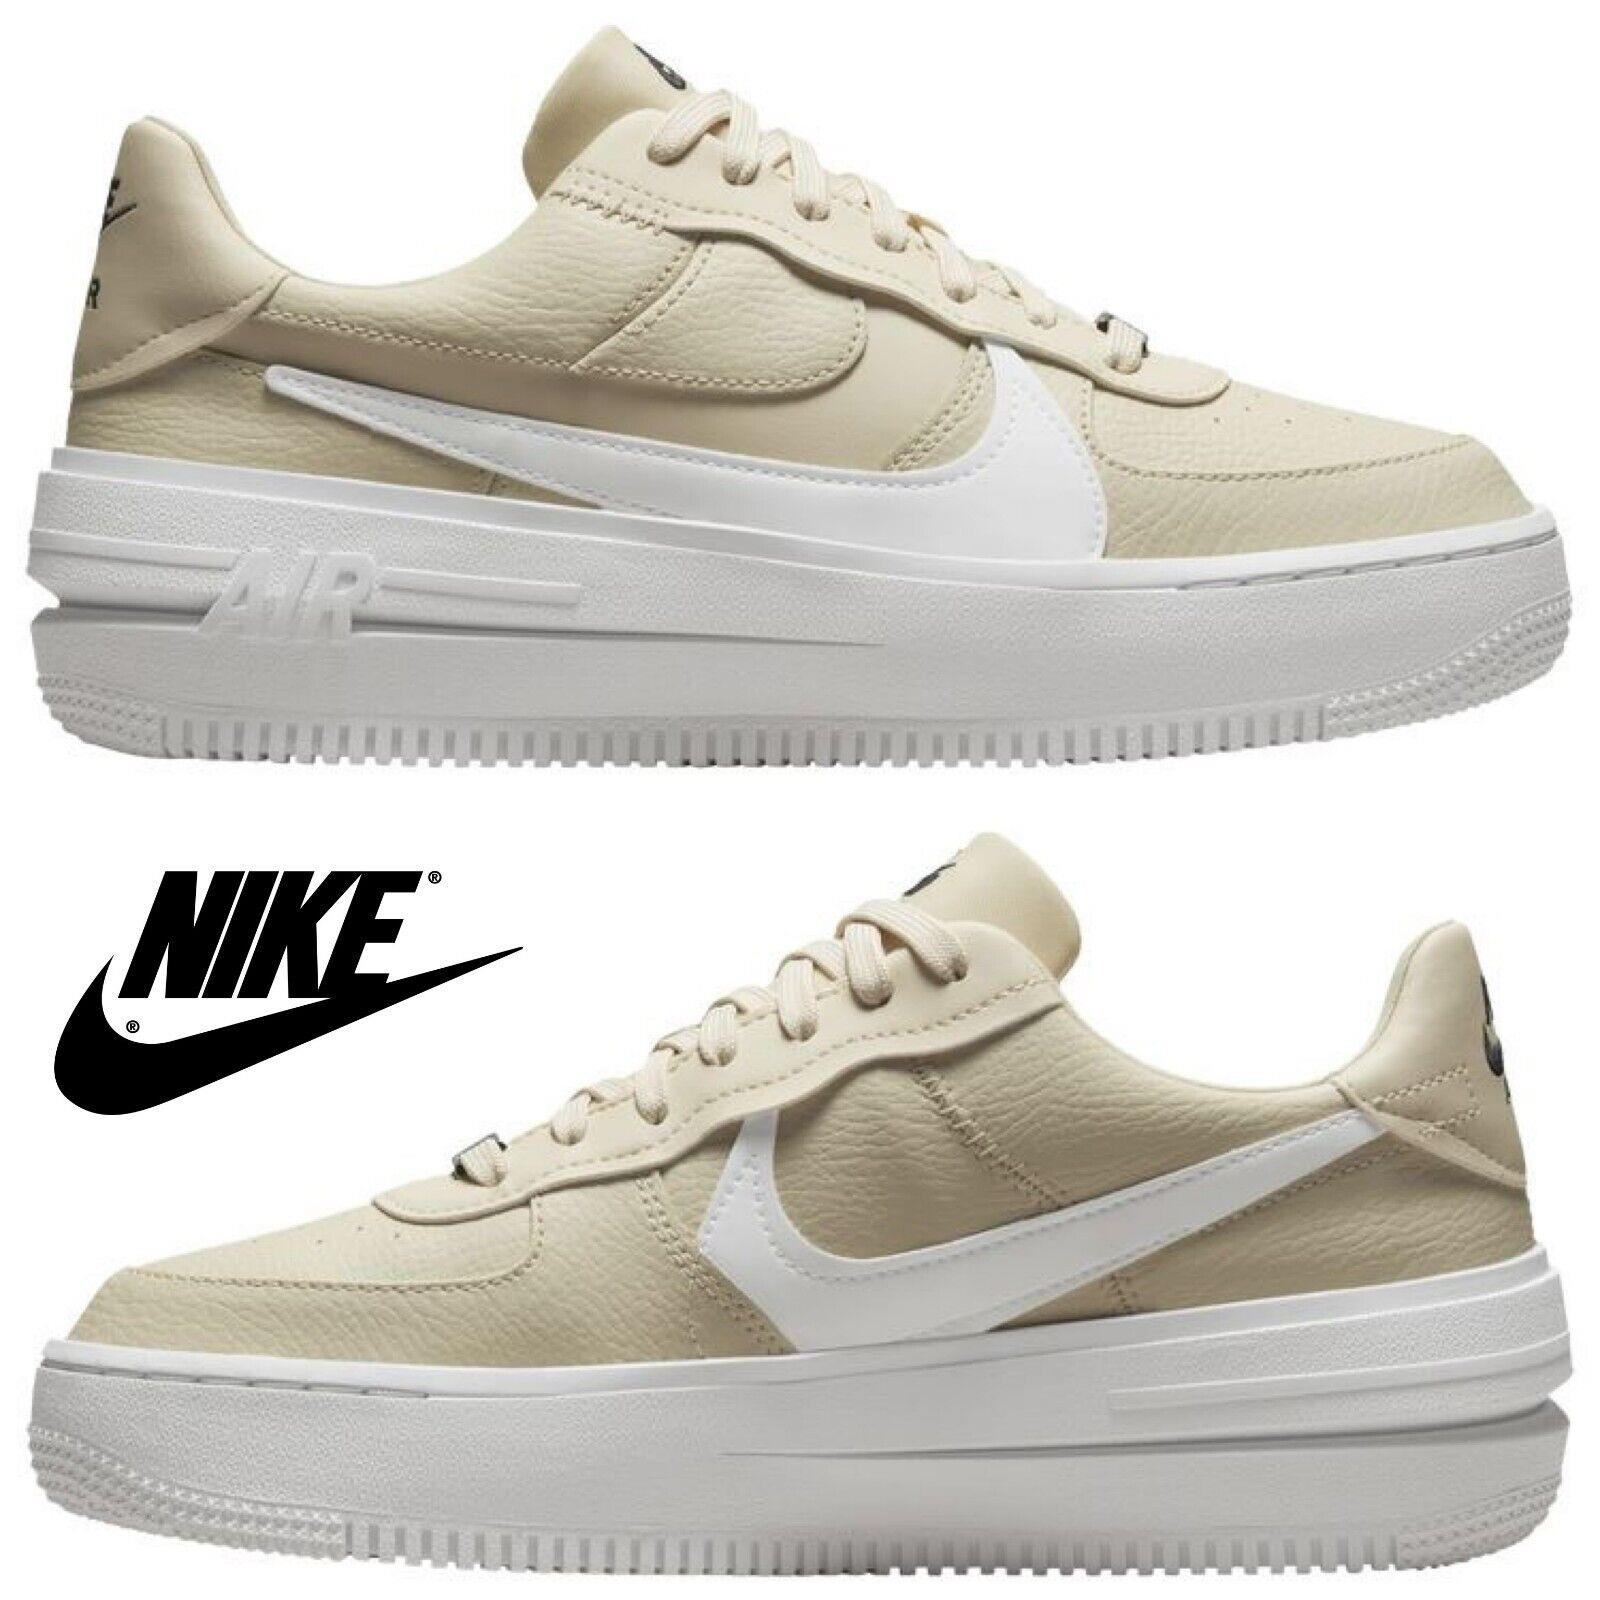 Nike Air Force 1 Platform Low Women`s Running Shoes Casual Sneakers Sport Beige - Beige , Sail/White/Black Manufacturer